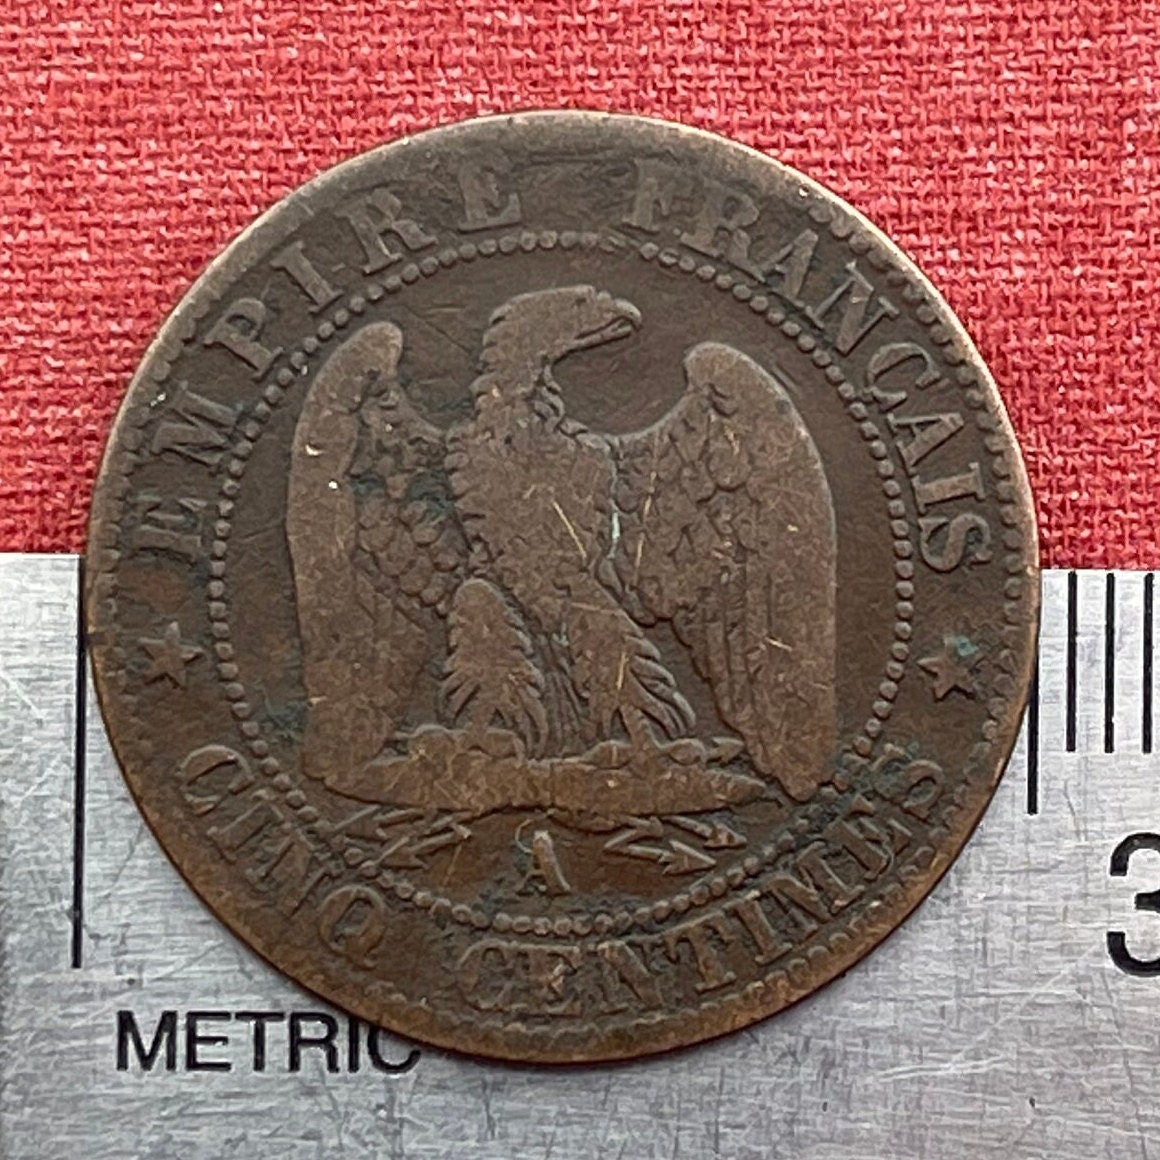 Emperor Napoleon III & French Imperial Eagle 5 Centimes France Authentic Coin Money for Jewelry and Craft Making (Second Empire)